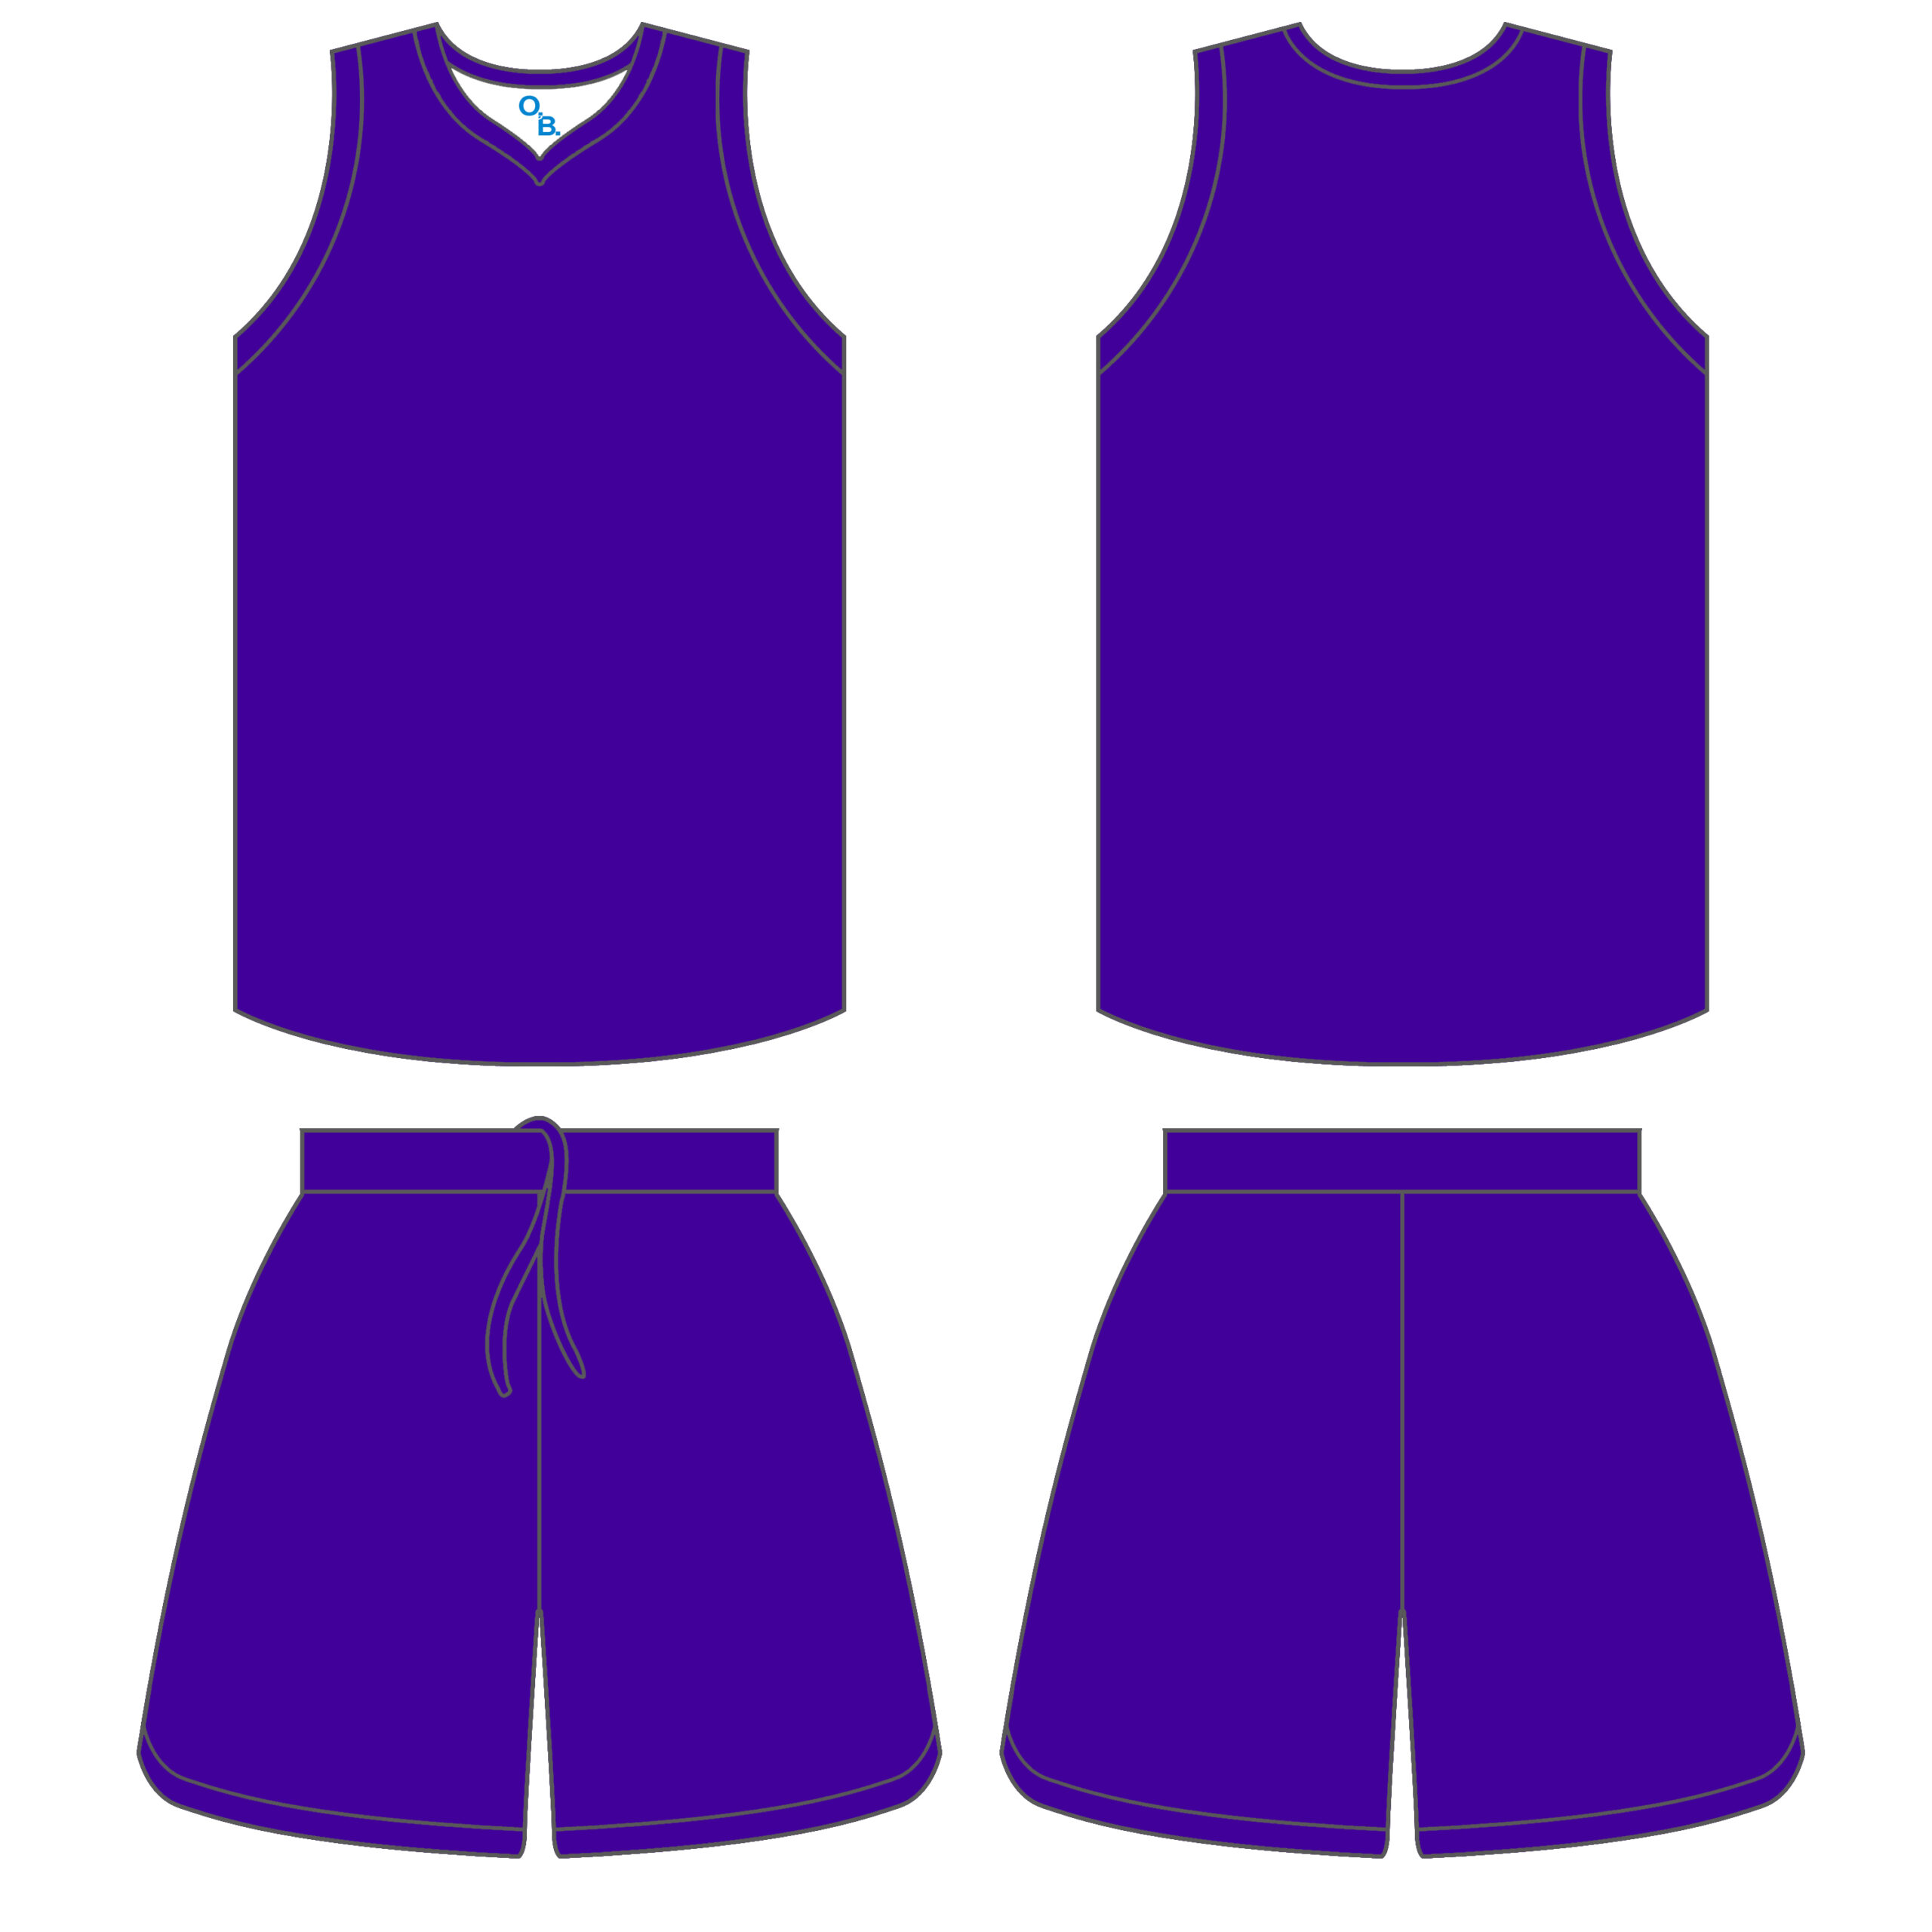 Basketball Uniform Template 10 by TimeOBrien on DeviantArt Within Blank Basketball Uniform Template